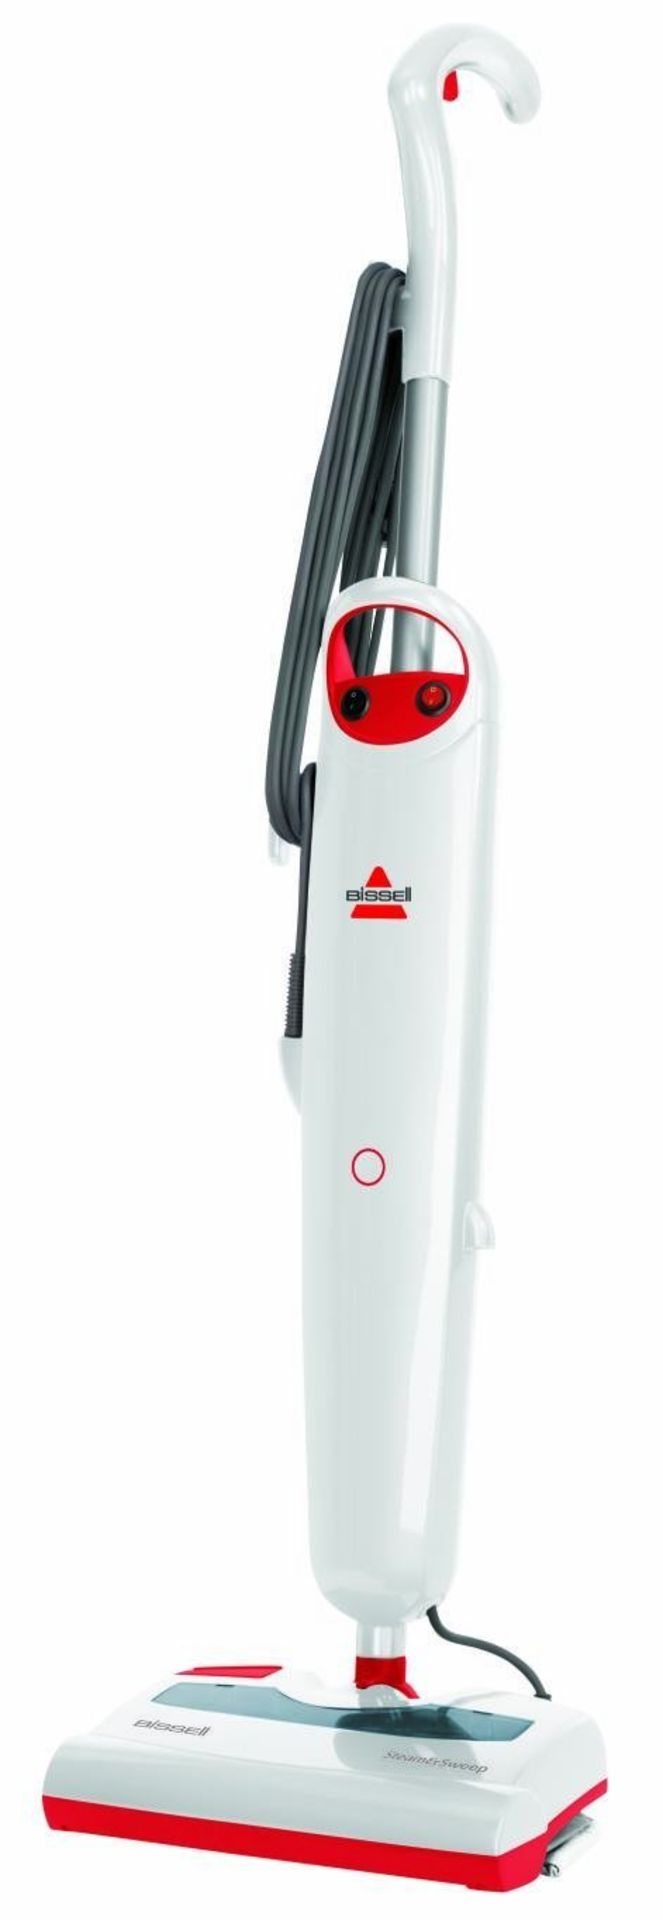 Lot of 5 Units-*UK ONLY* Bissell Steam and Sweep Steam Mop - White - 42A8E